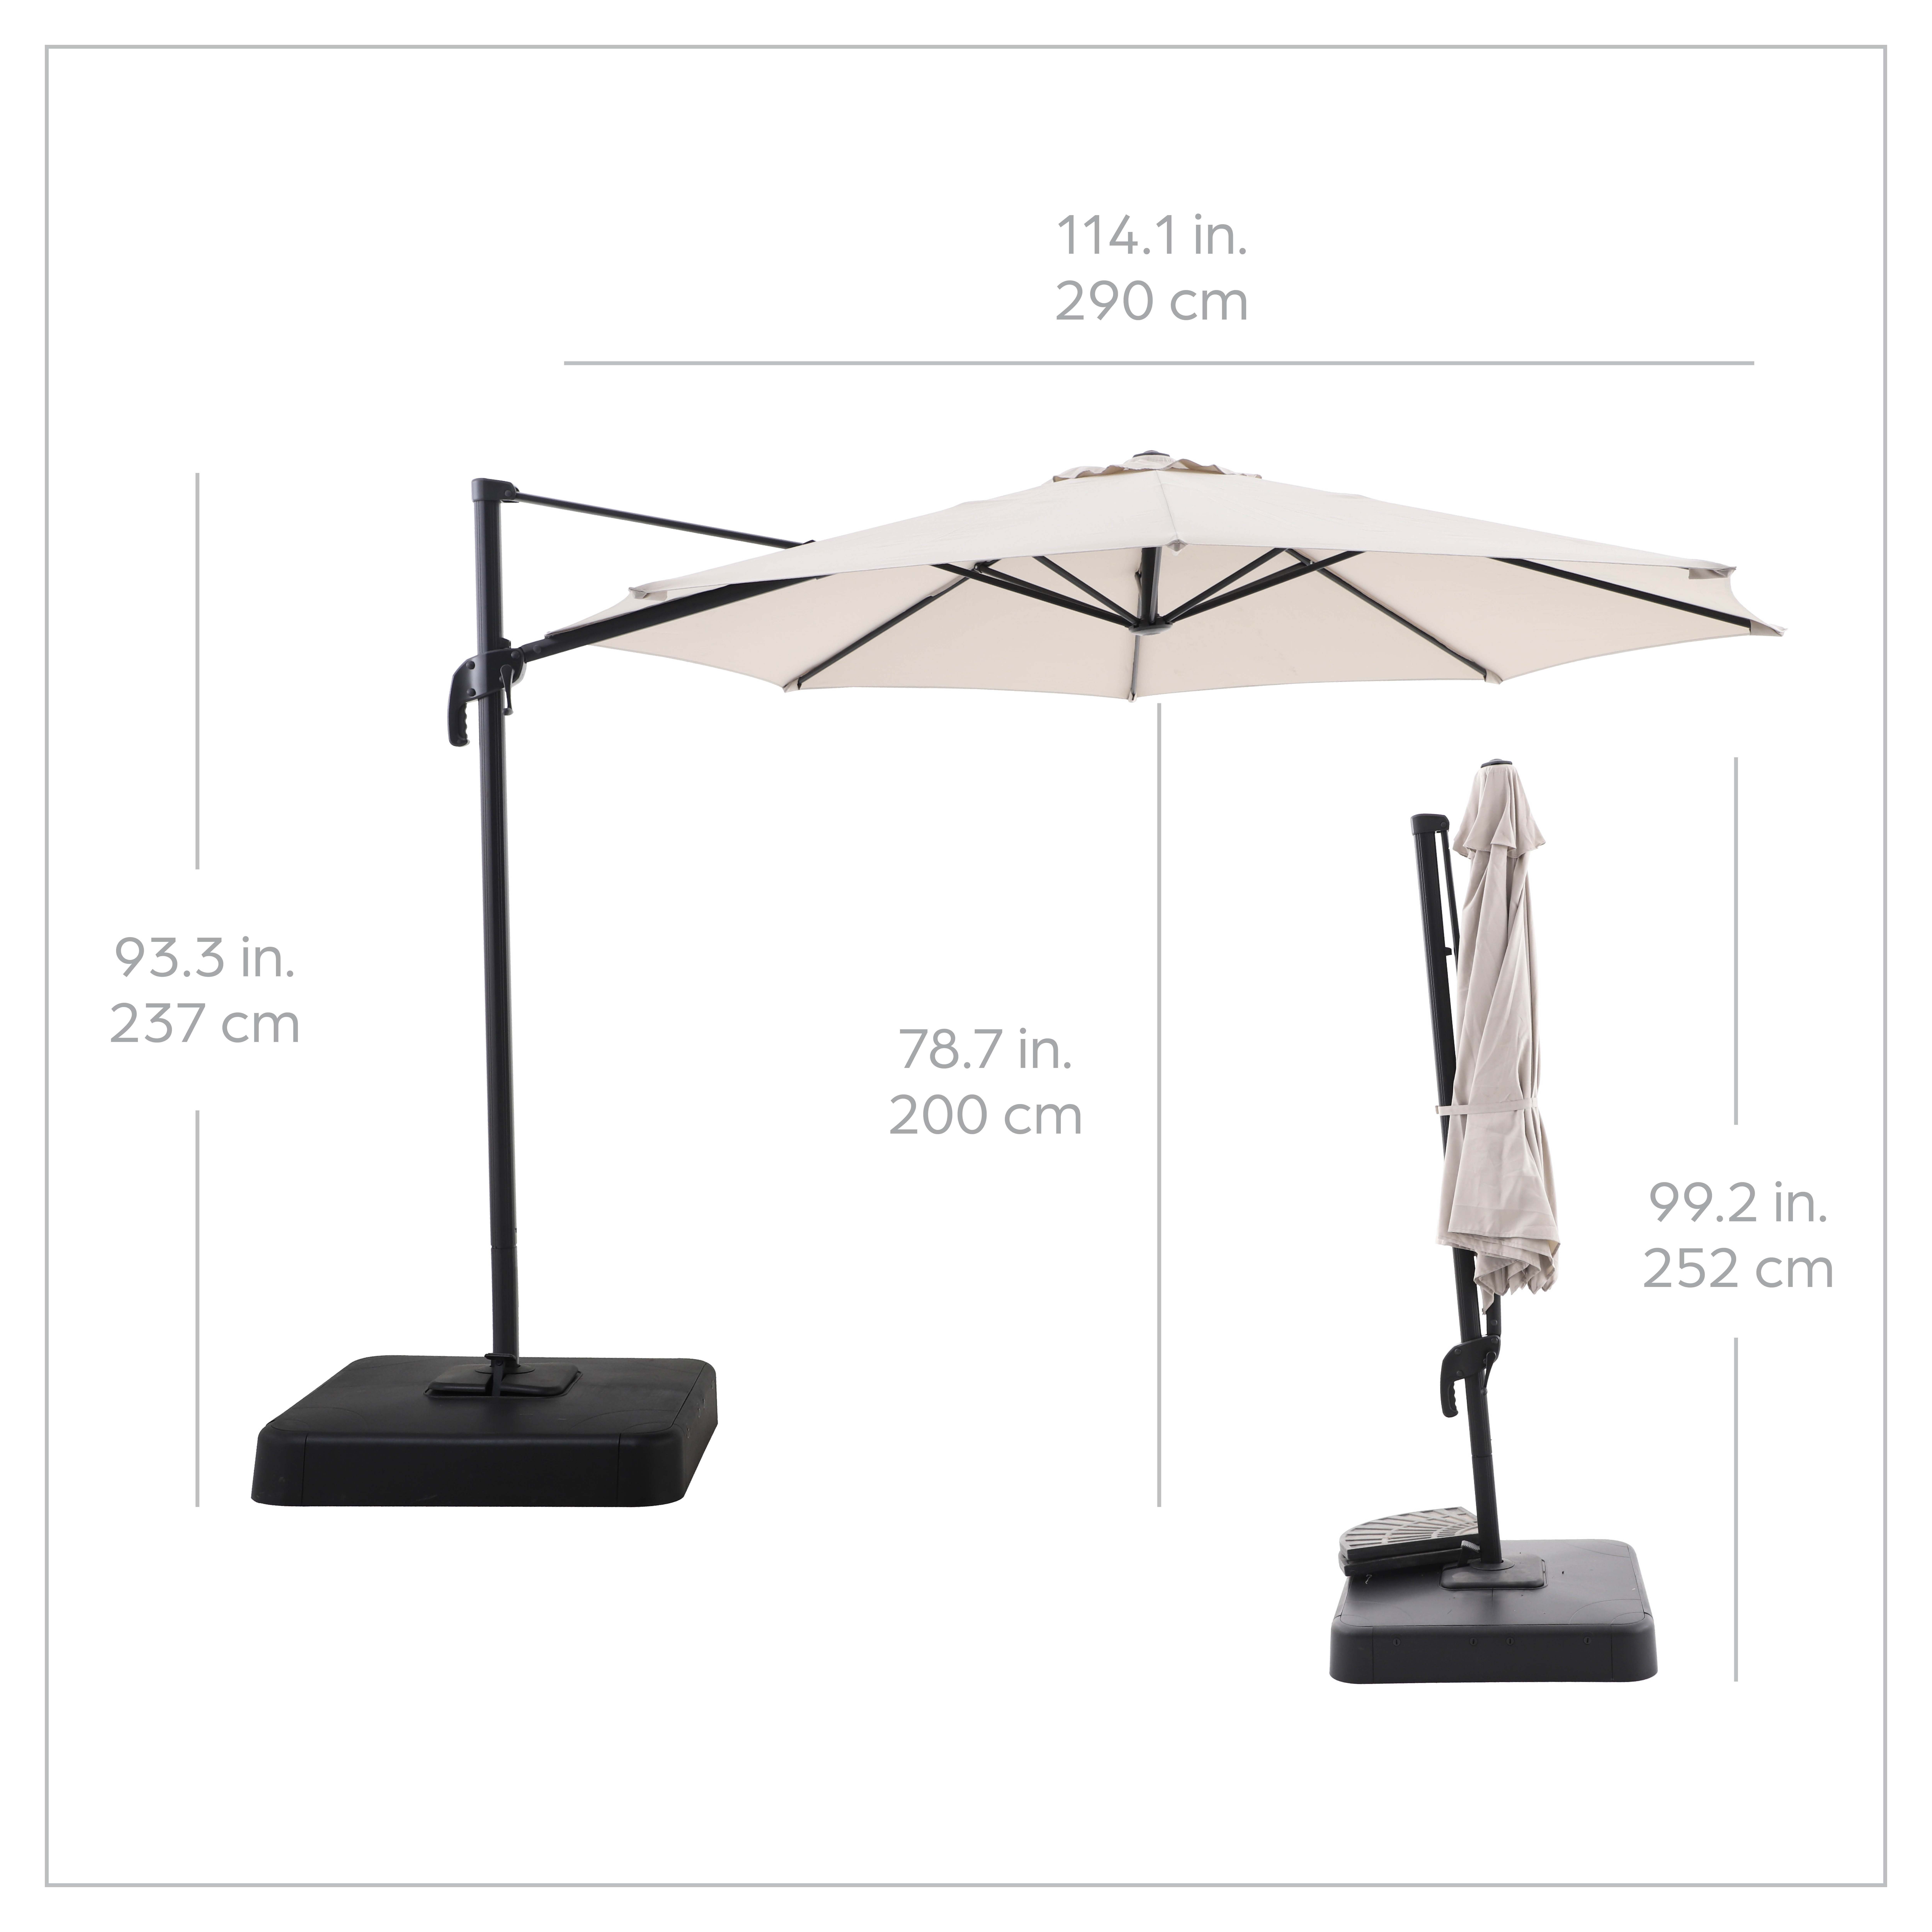 Mainstays Outdoor 10' Round Offset Tilt Patio Umbrella and Base, Stone - image 4 of 8